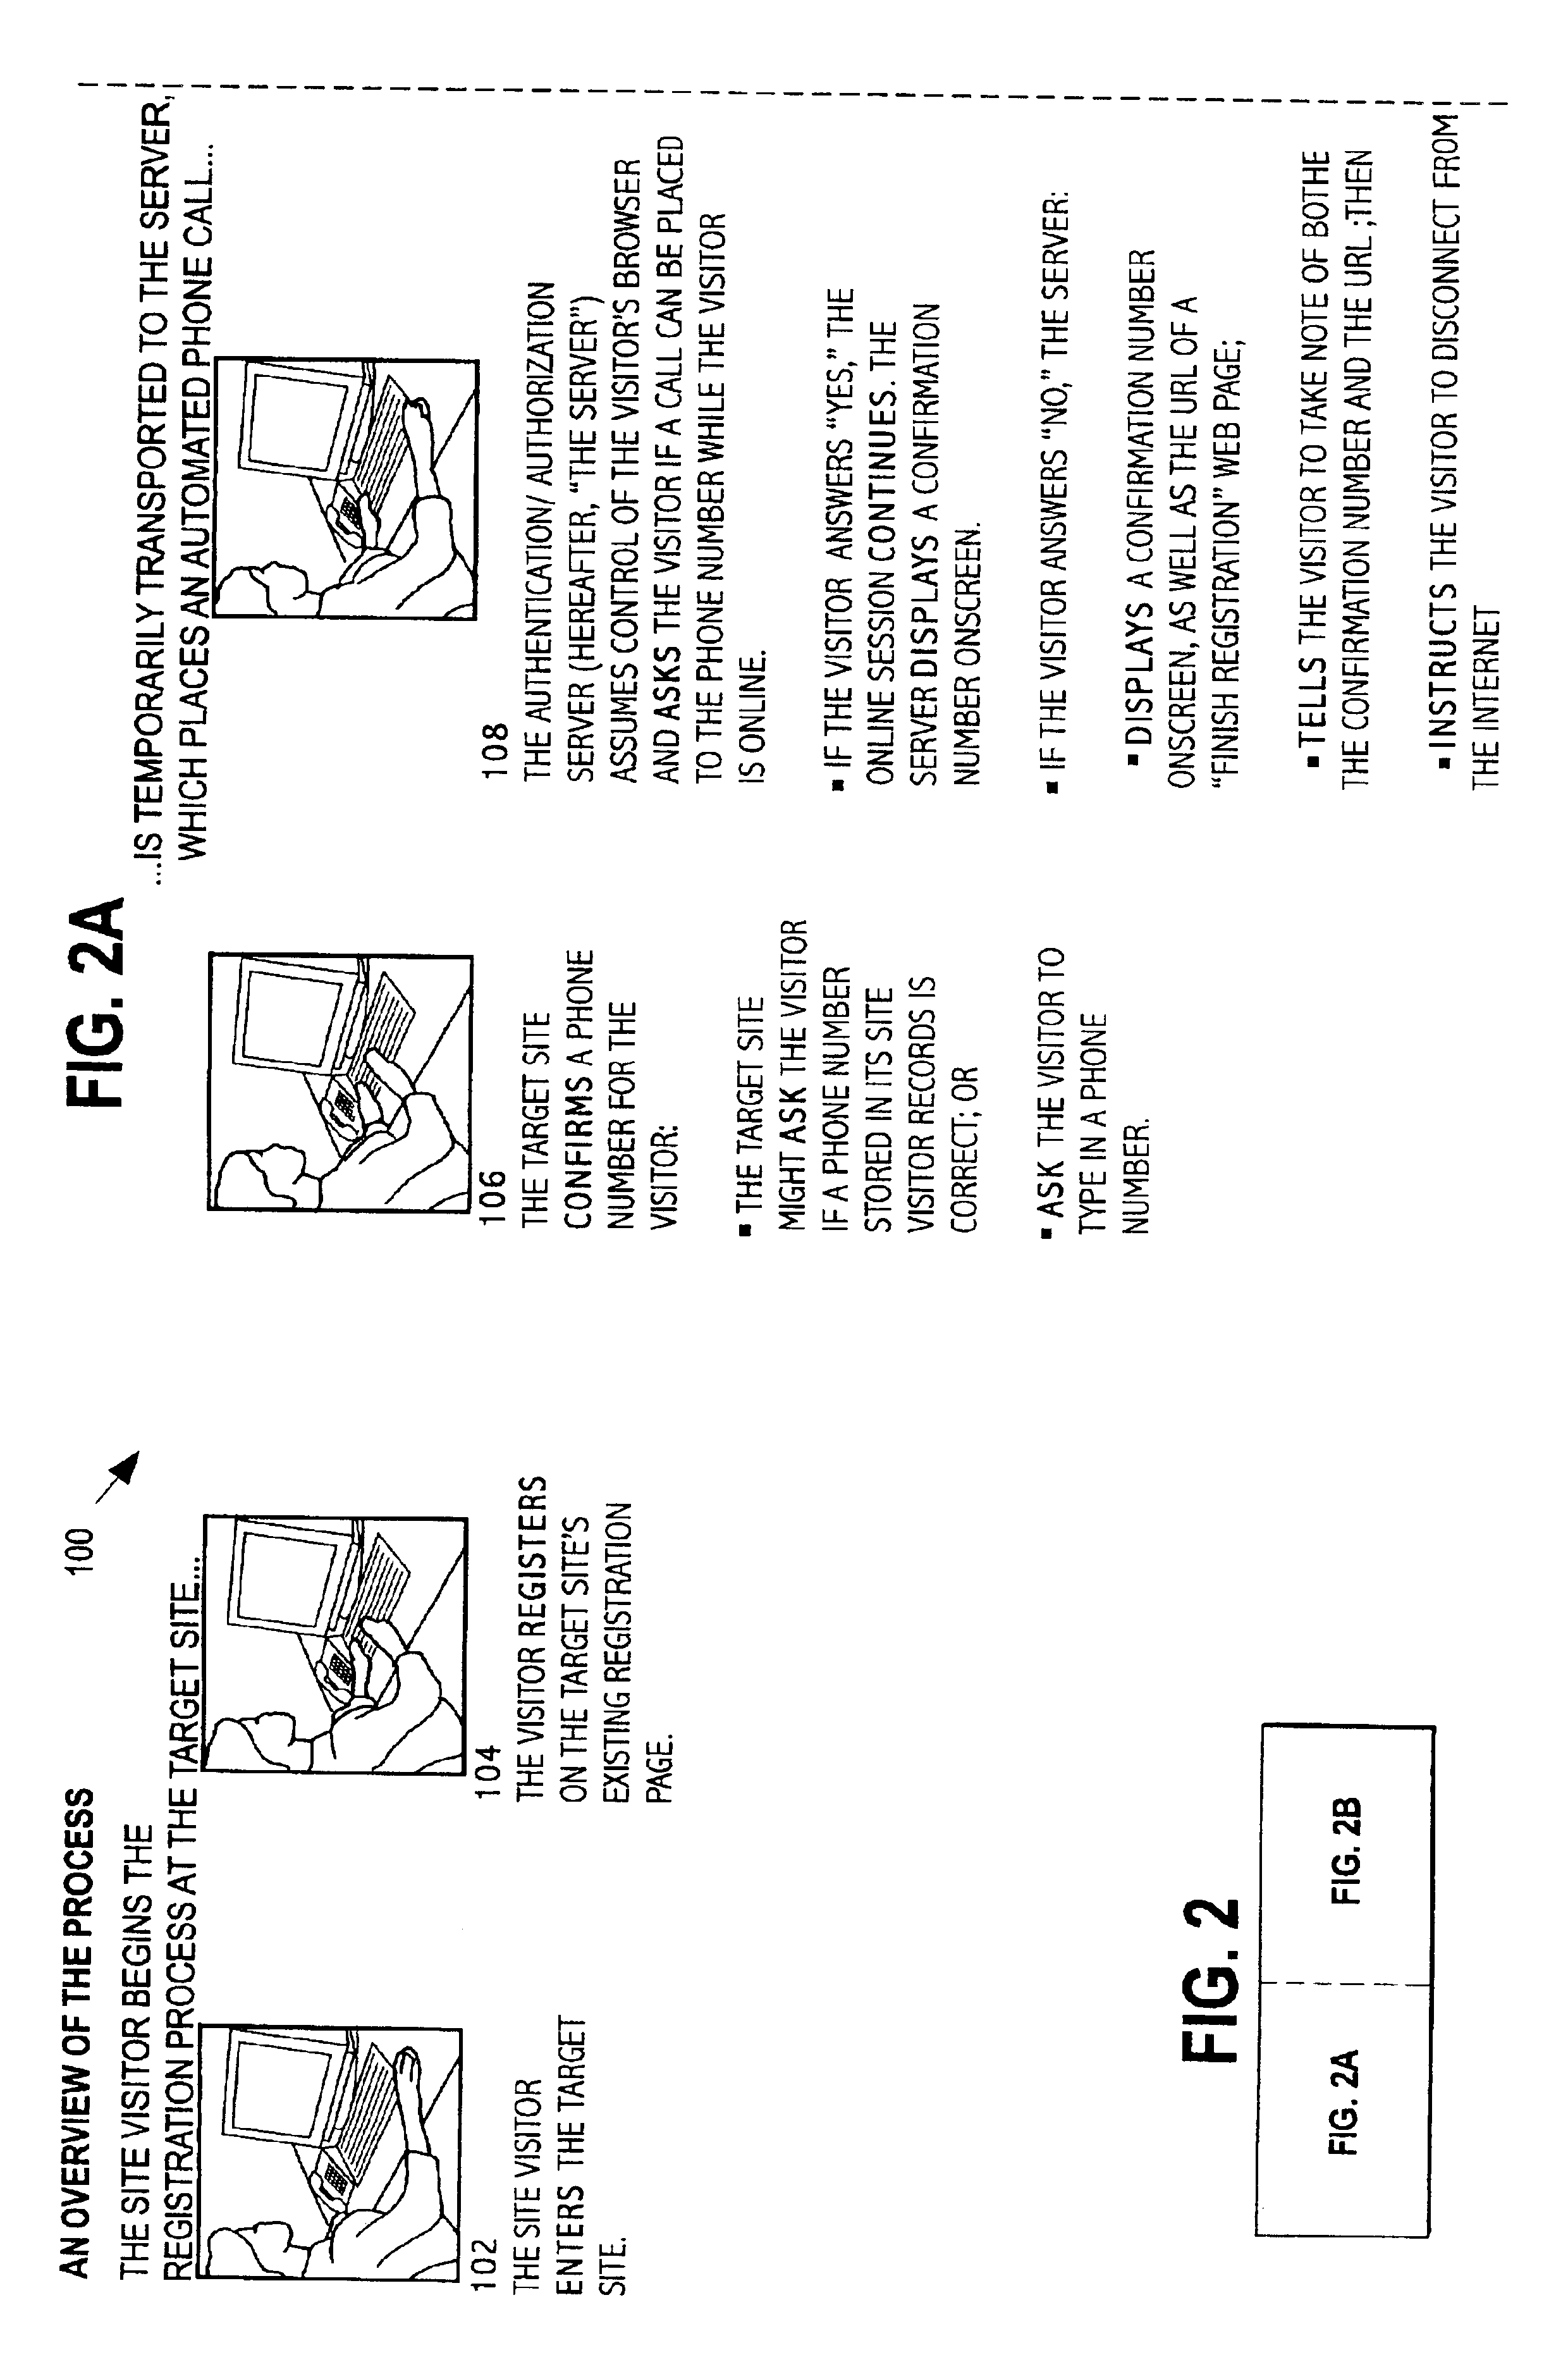 System and method of using the public switched telephone network in providing authentication or authorization for online transactions